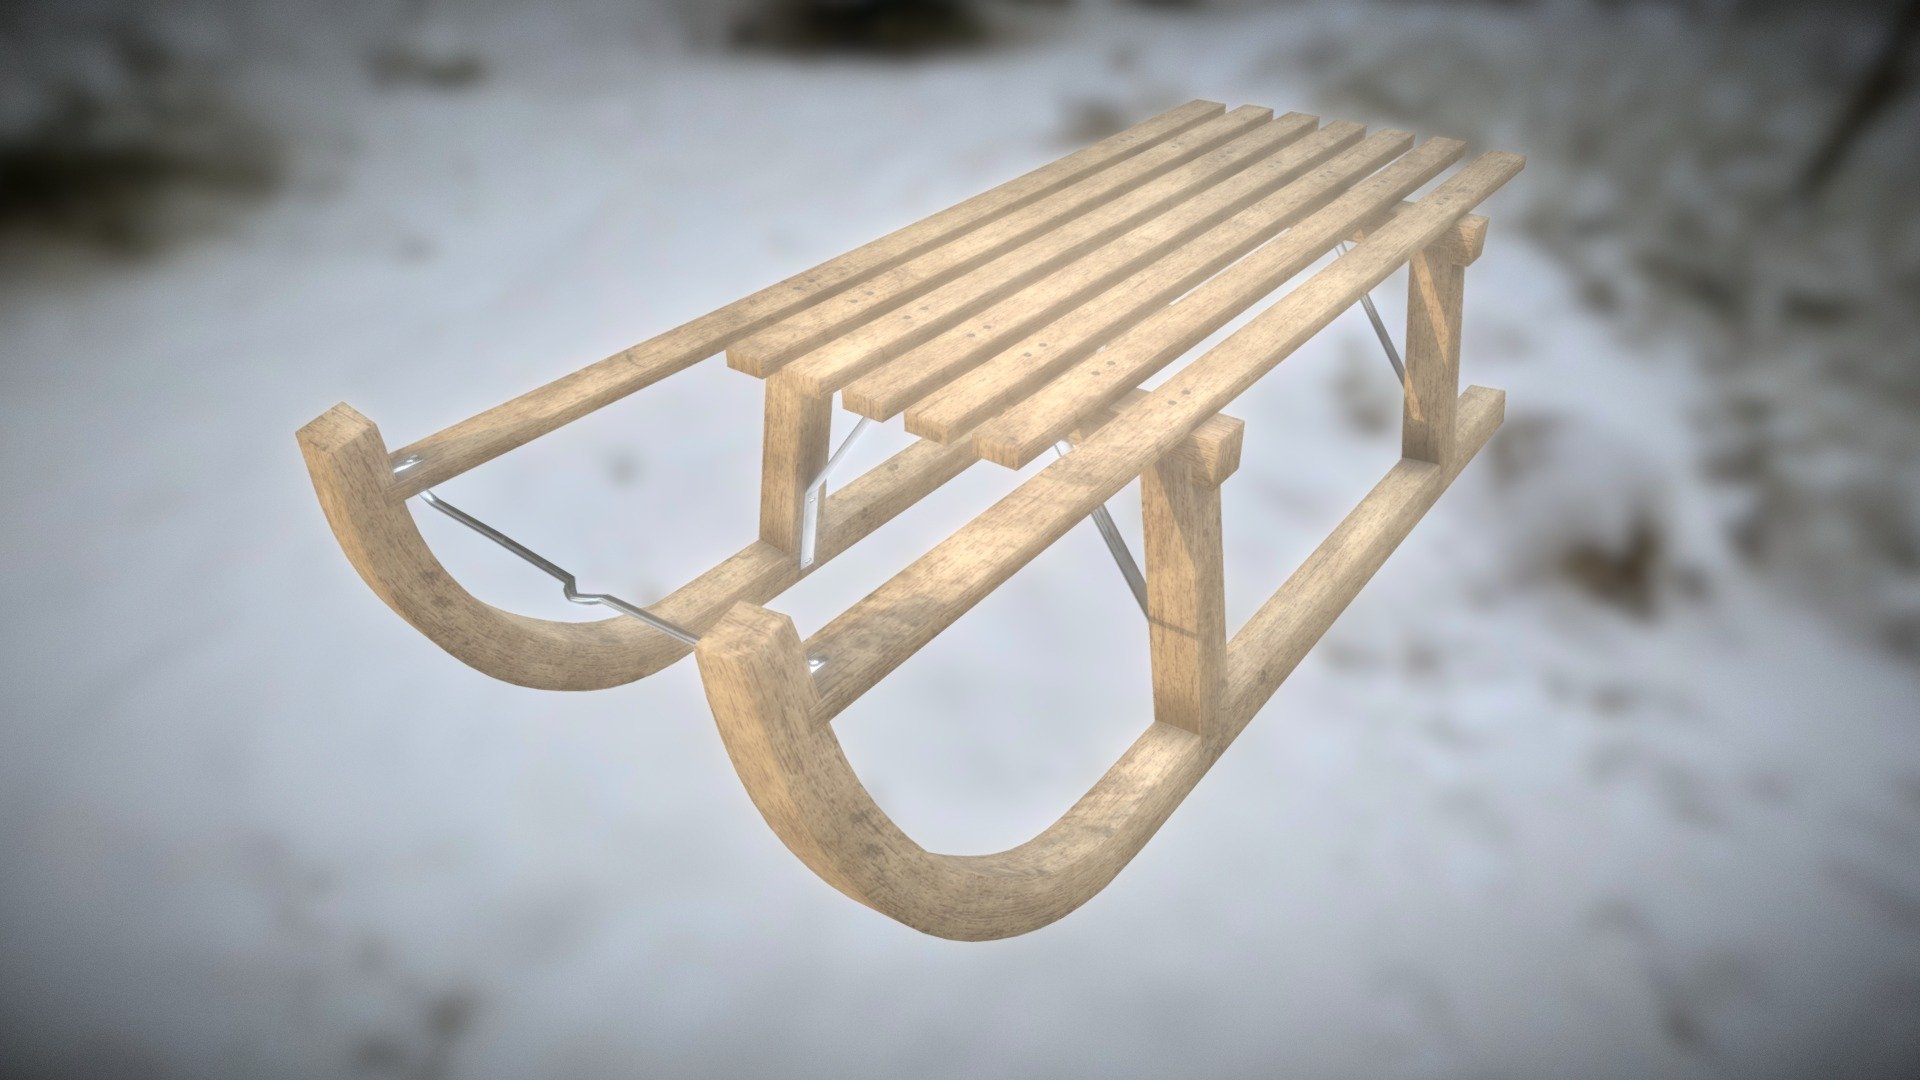 PBR painted on one non-overlapping UV-atlas

Additional zip file includes: Mesh as DAE / FBX / OBJ,
Textures as PNG 2048x2048 incliding albedo (diffuse) normal, ambient occlusion, metallic - Game Ready Wooden Sleigh PBR Low Poly - Buy Royalty Free 3D model by FunFant 3d model